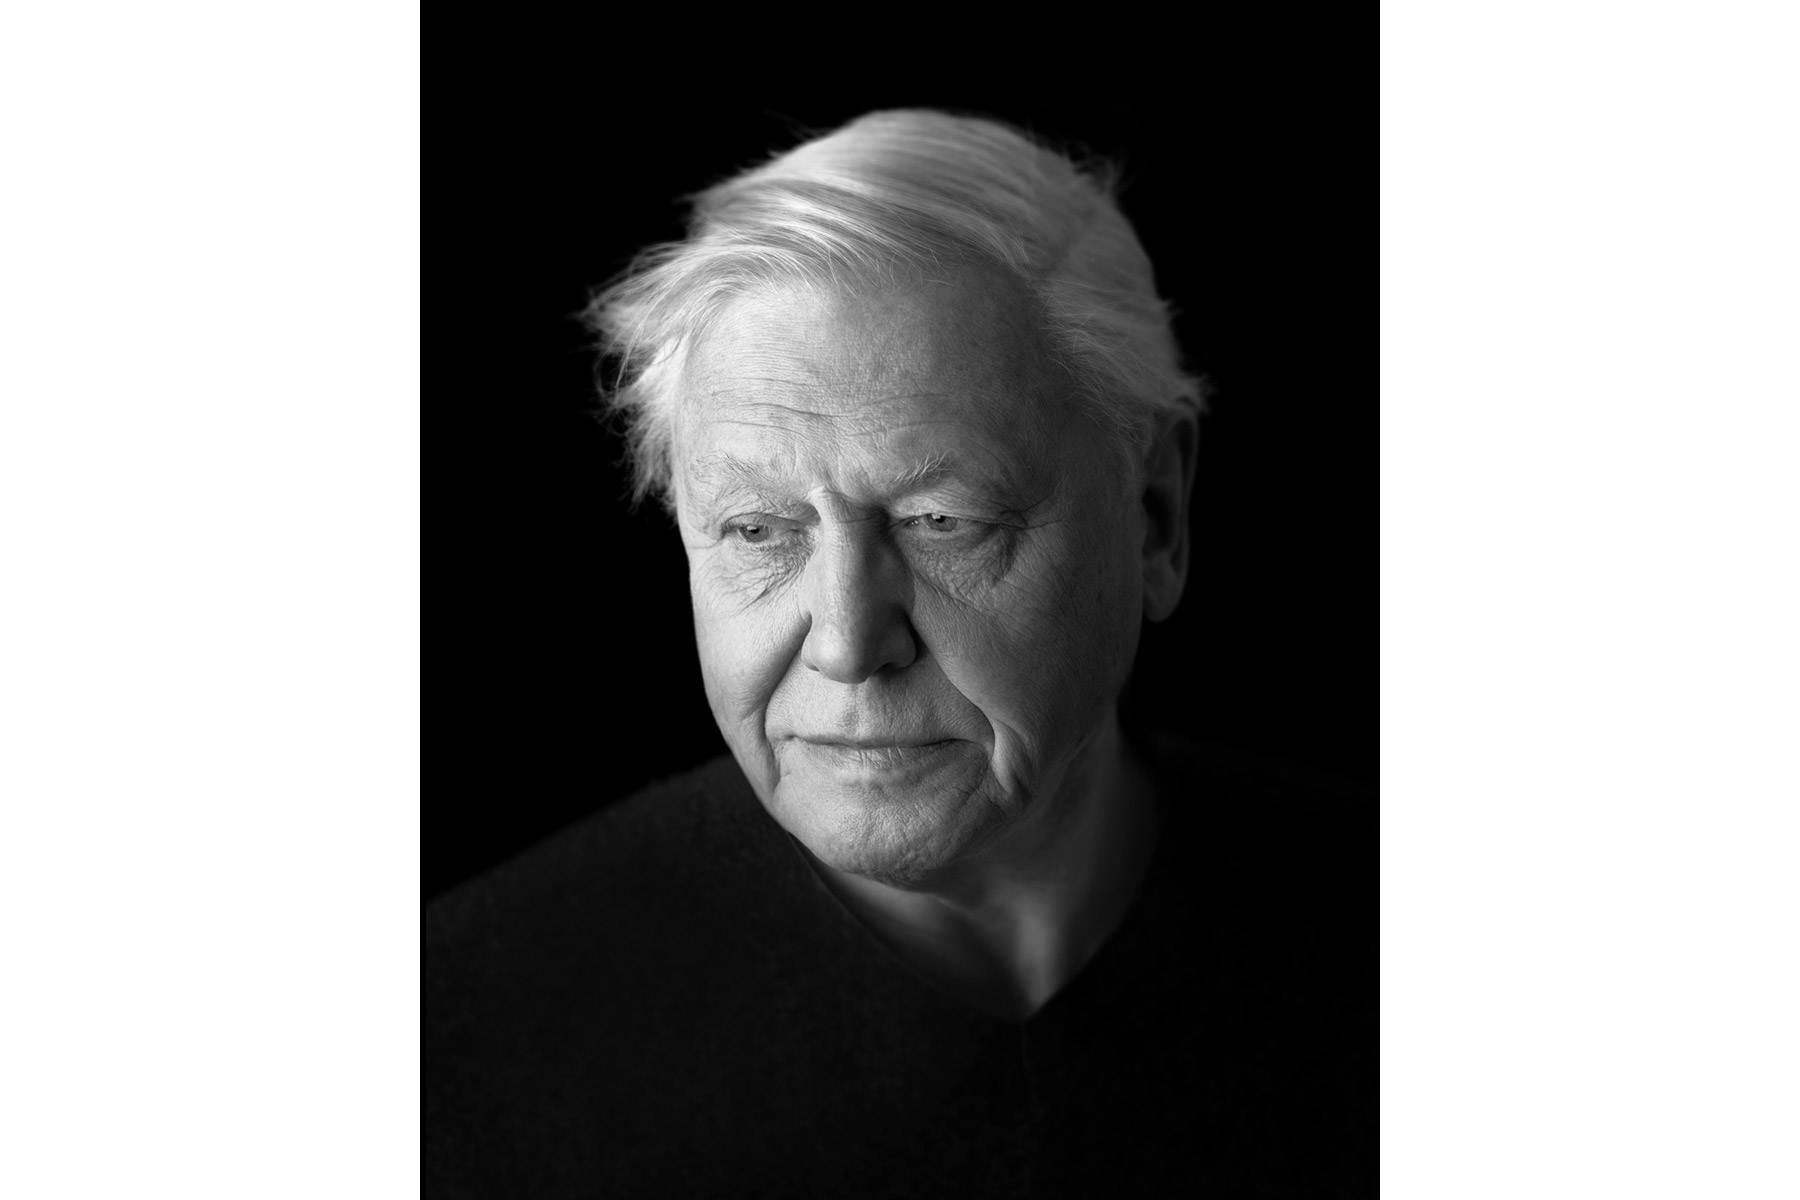 Portrait of Sir David Attenborough - Photograph by Richard Boll for the National Portrait Gallery in London